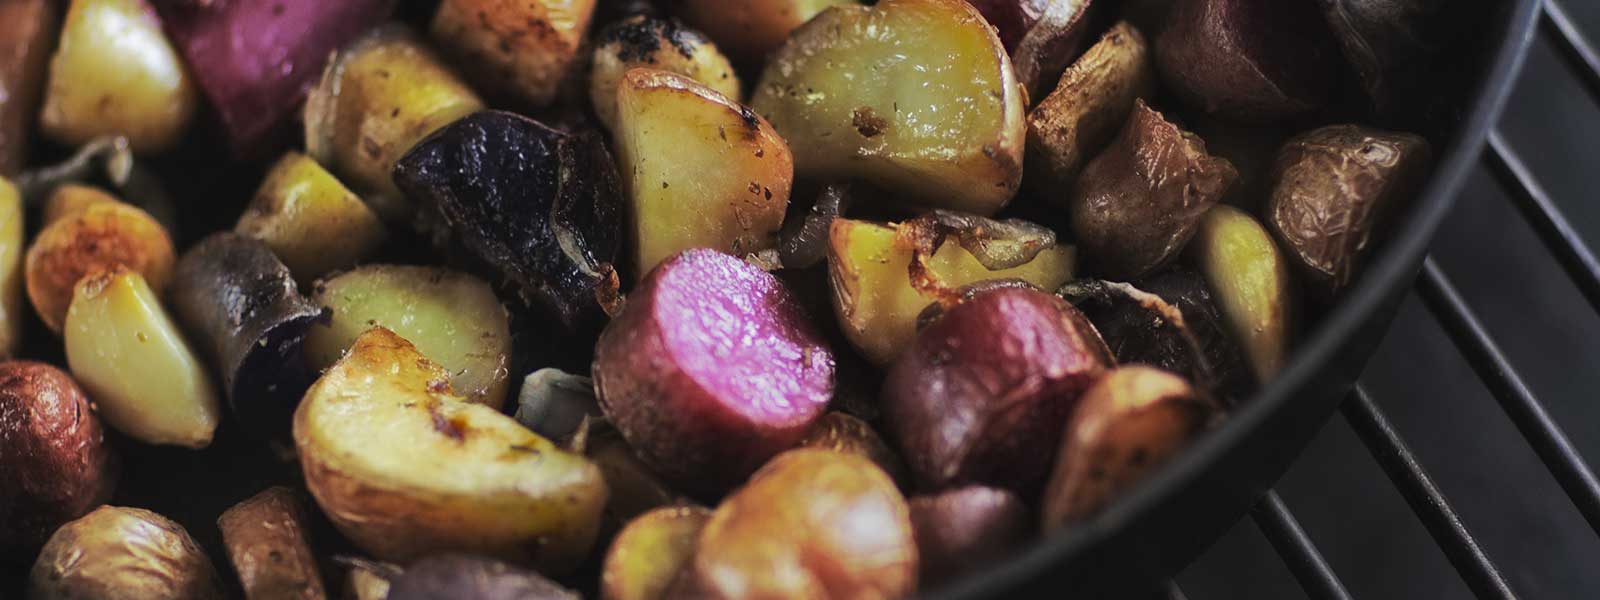 Roasted Potatoes on the Big Green Egg makes a great side dish